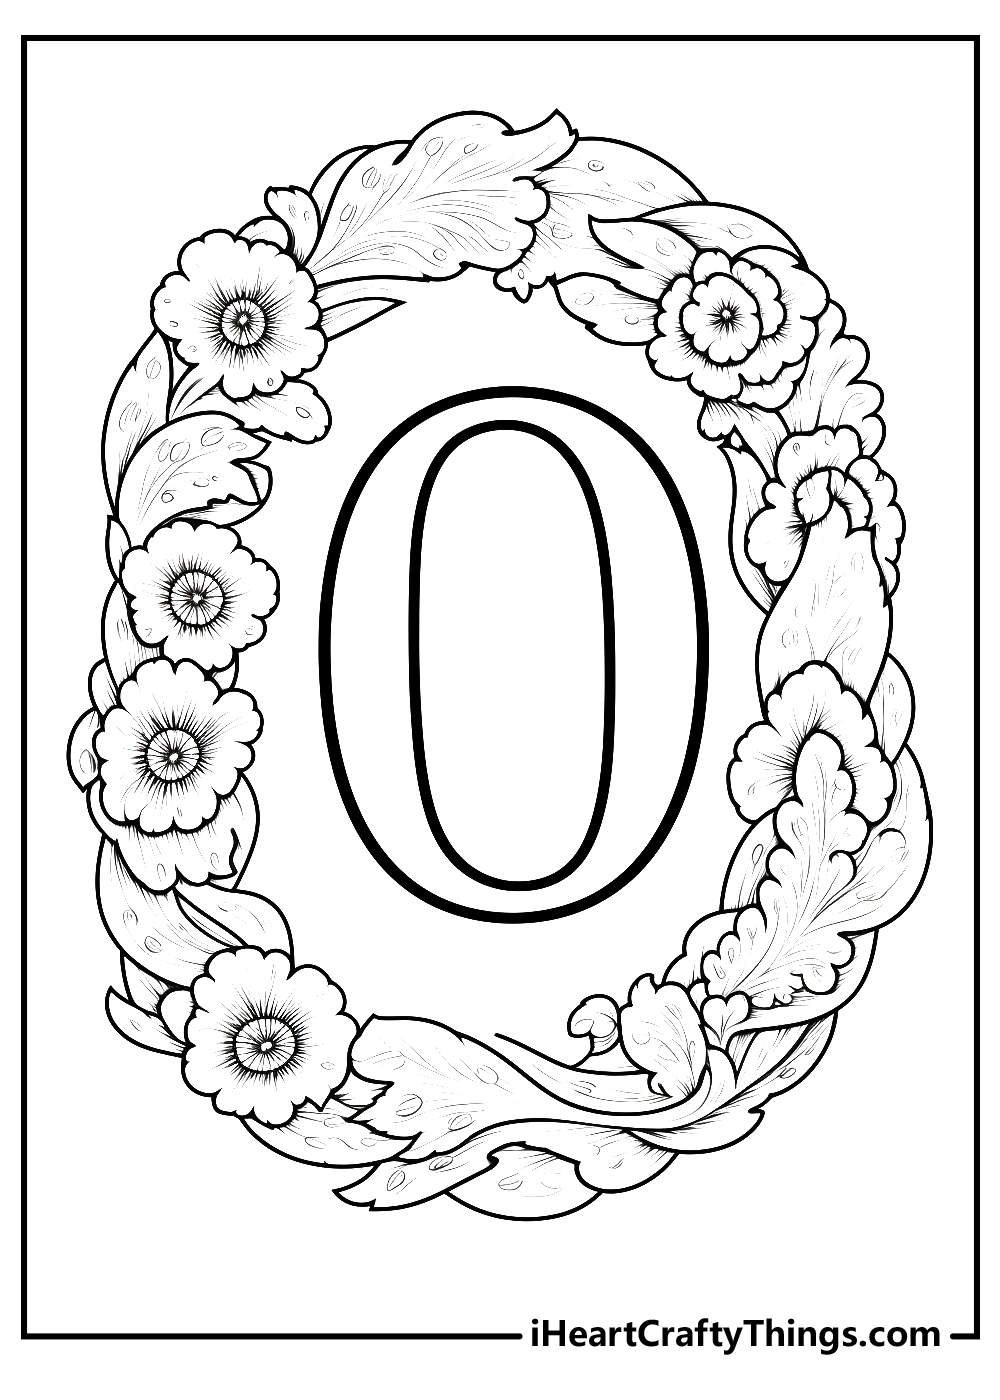 7+ O Coloring Page